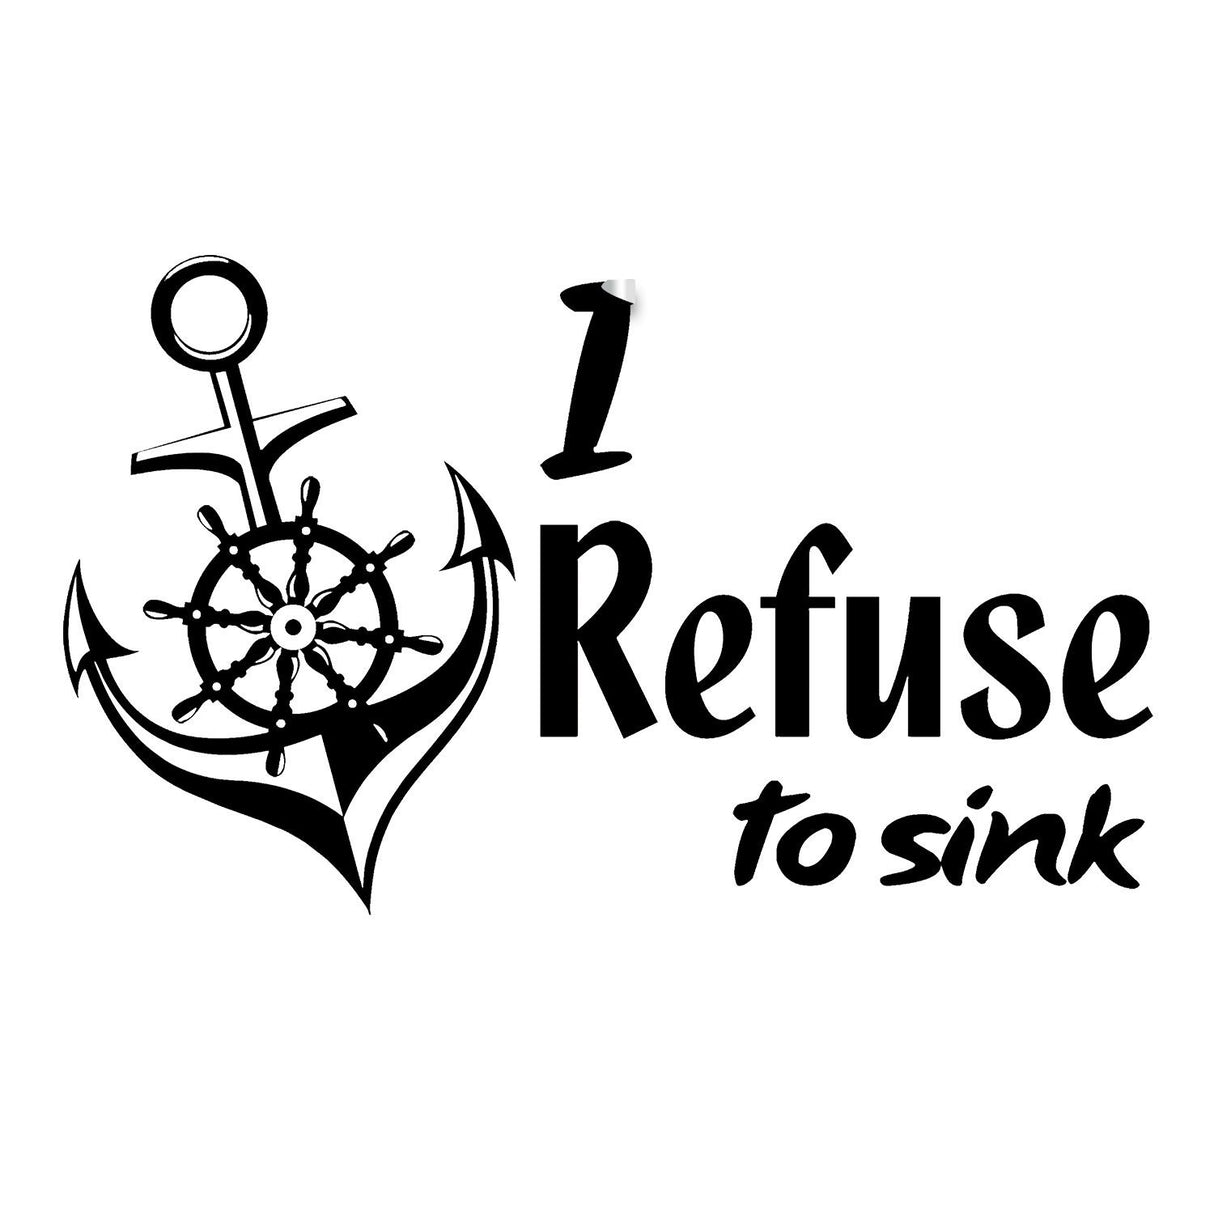 I Refuse To Sink Quote Sticker - Anchor Sign Art Vinyl Wall Decal